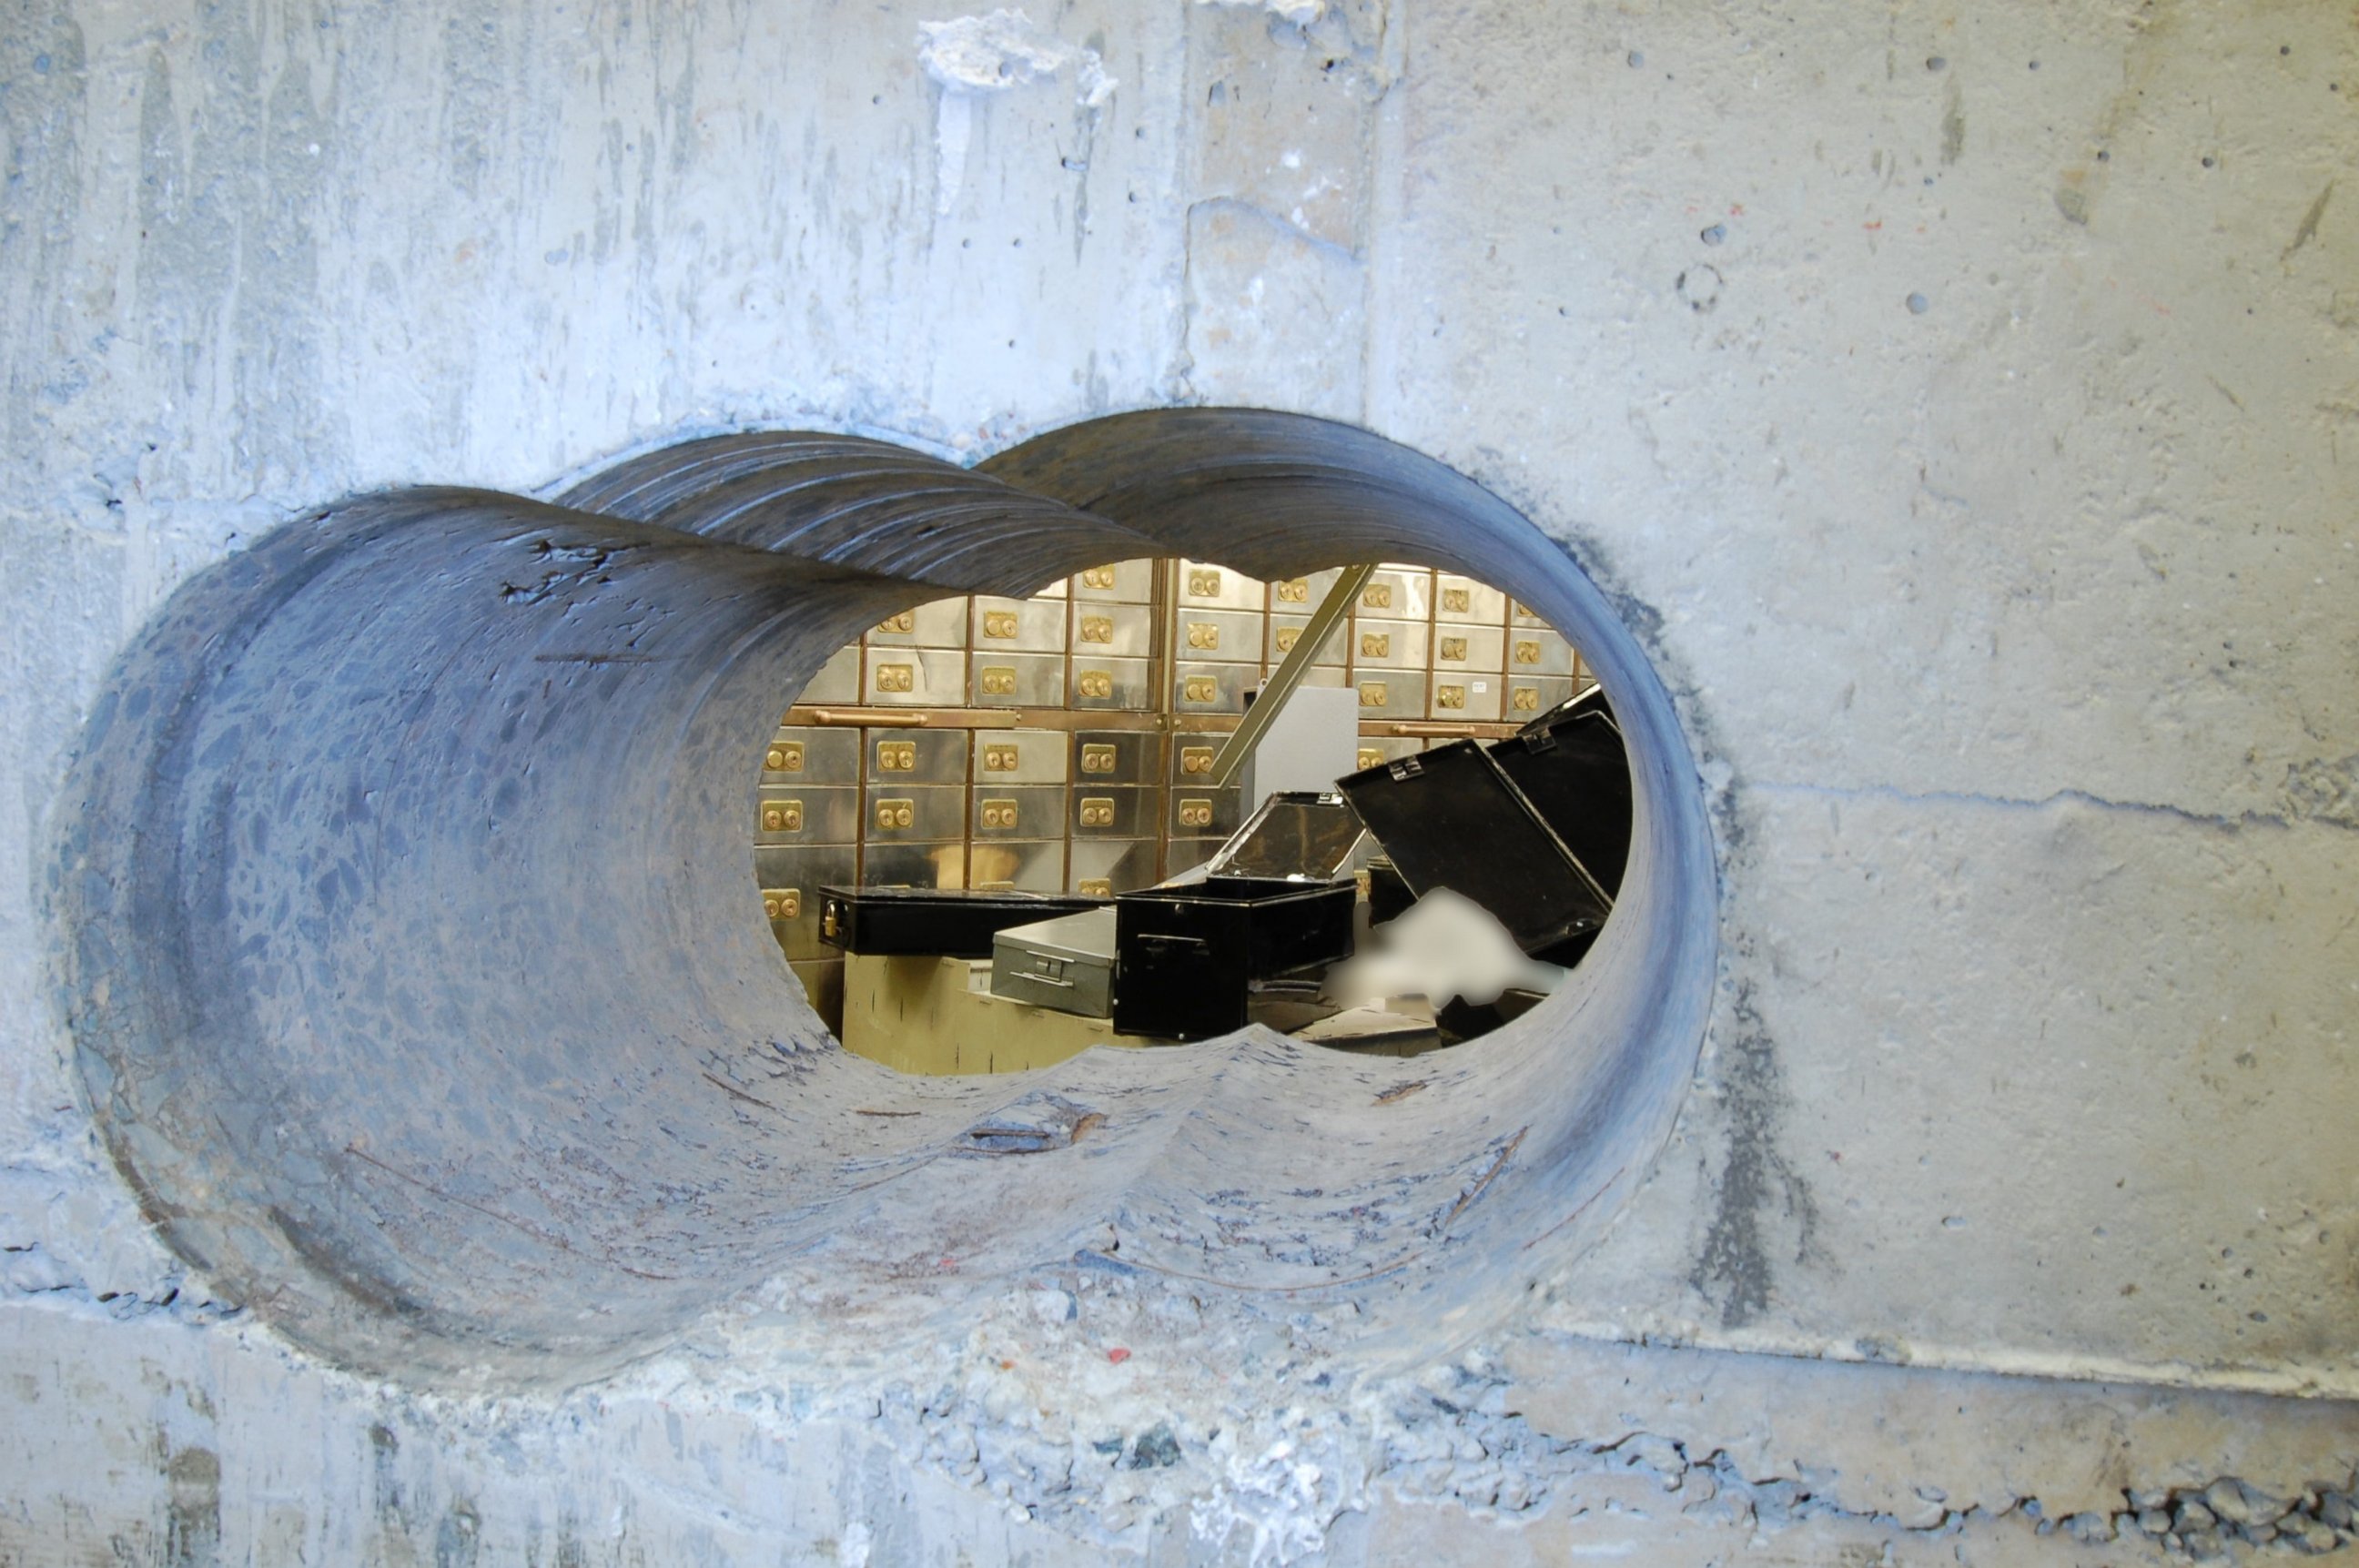 PHOTO: This is a an undated image by of the hole leading into the vault.